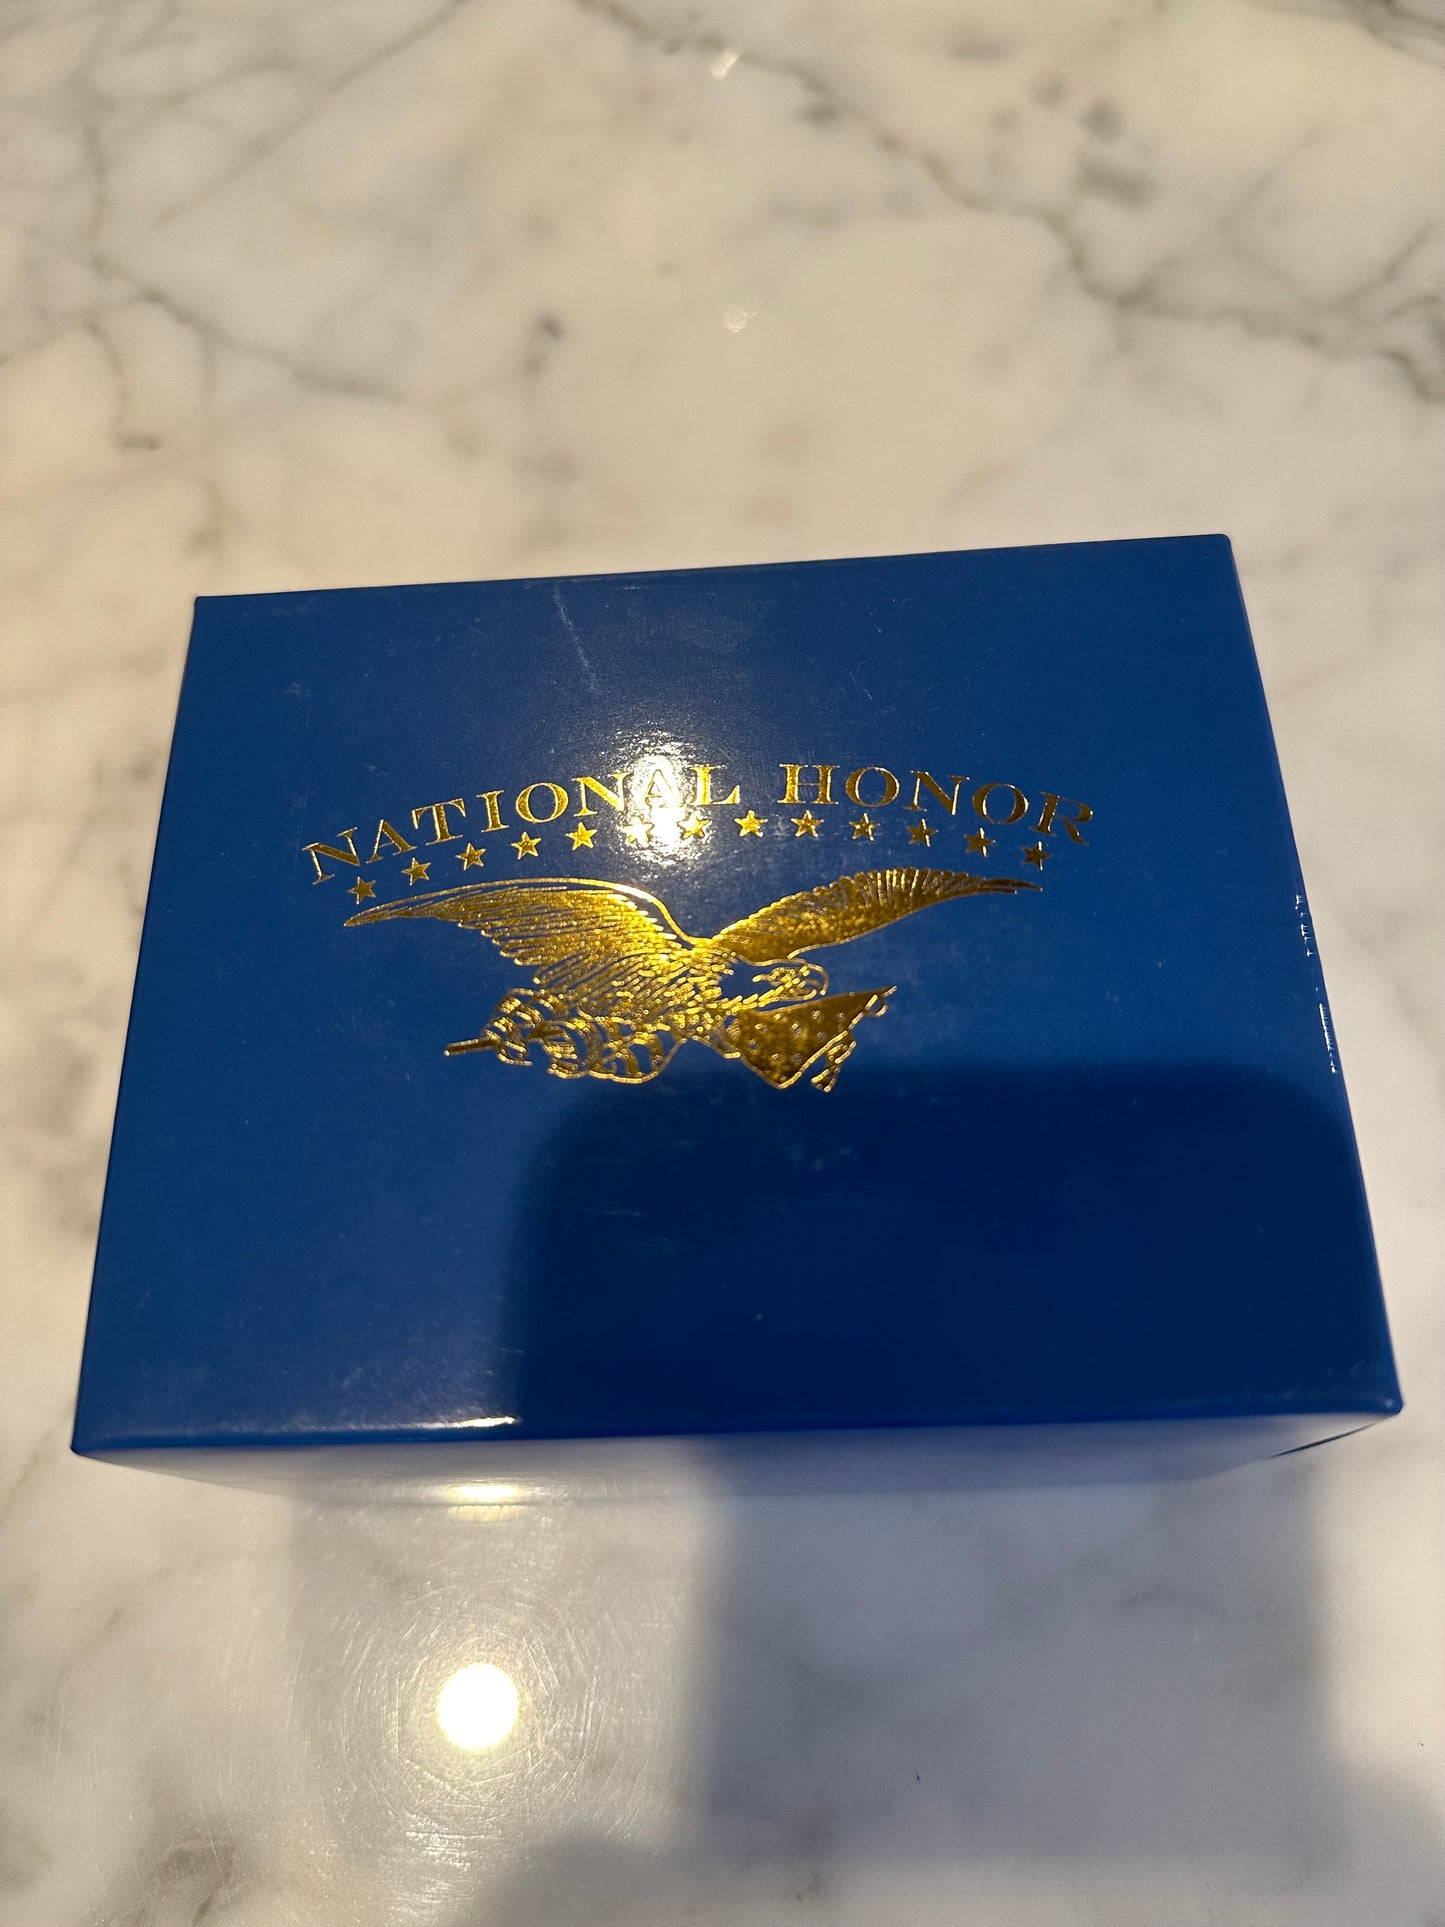 Collectible toy soldier miniature Washington's Inauguration. Box